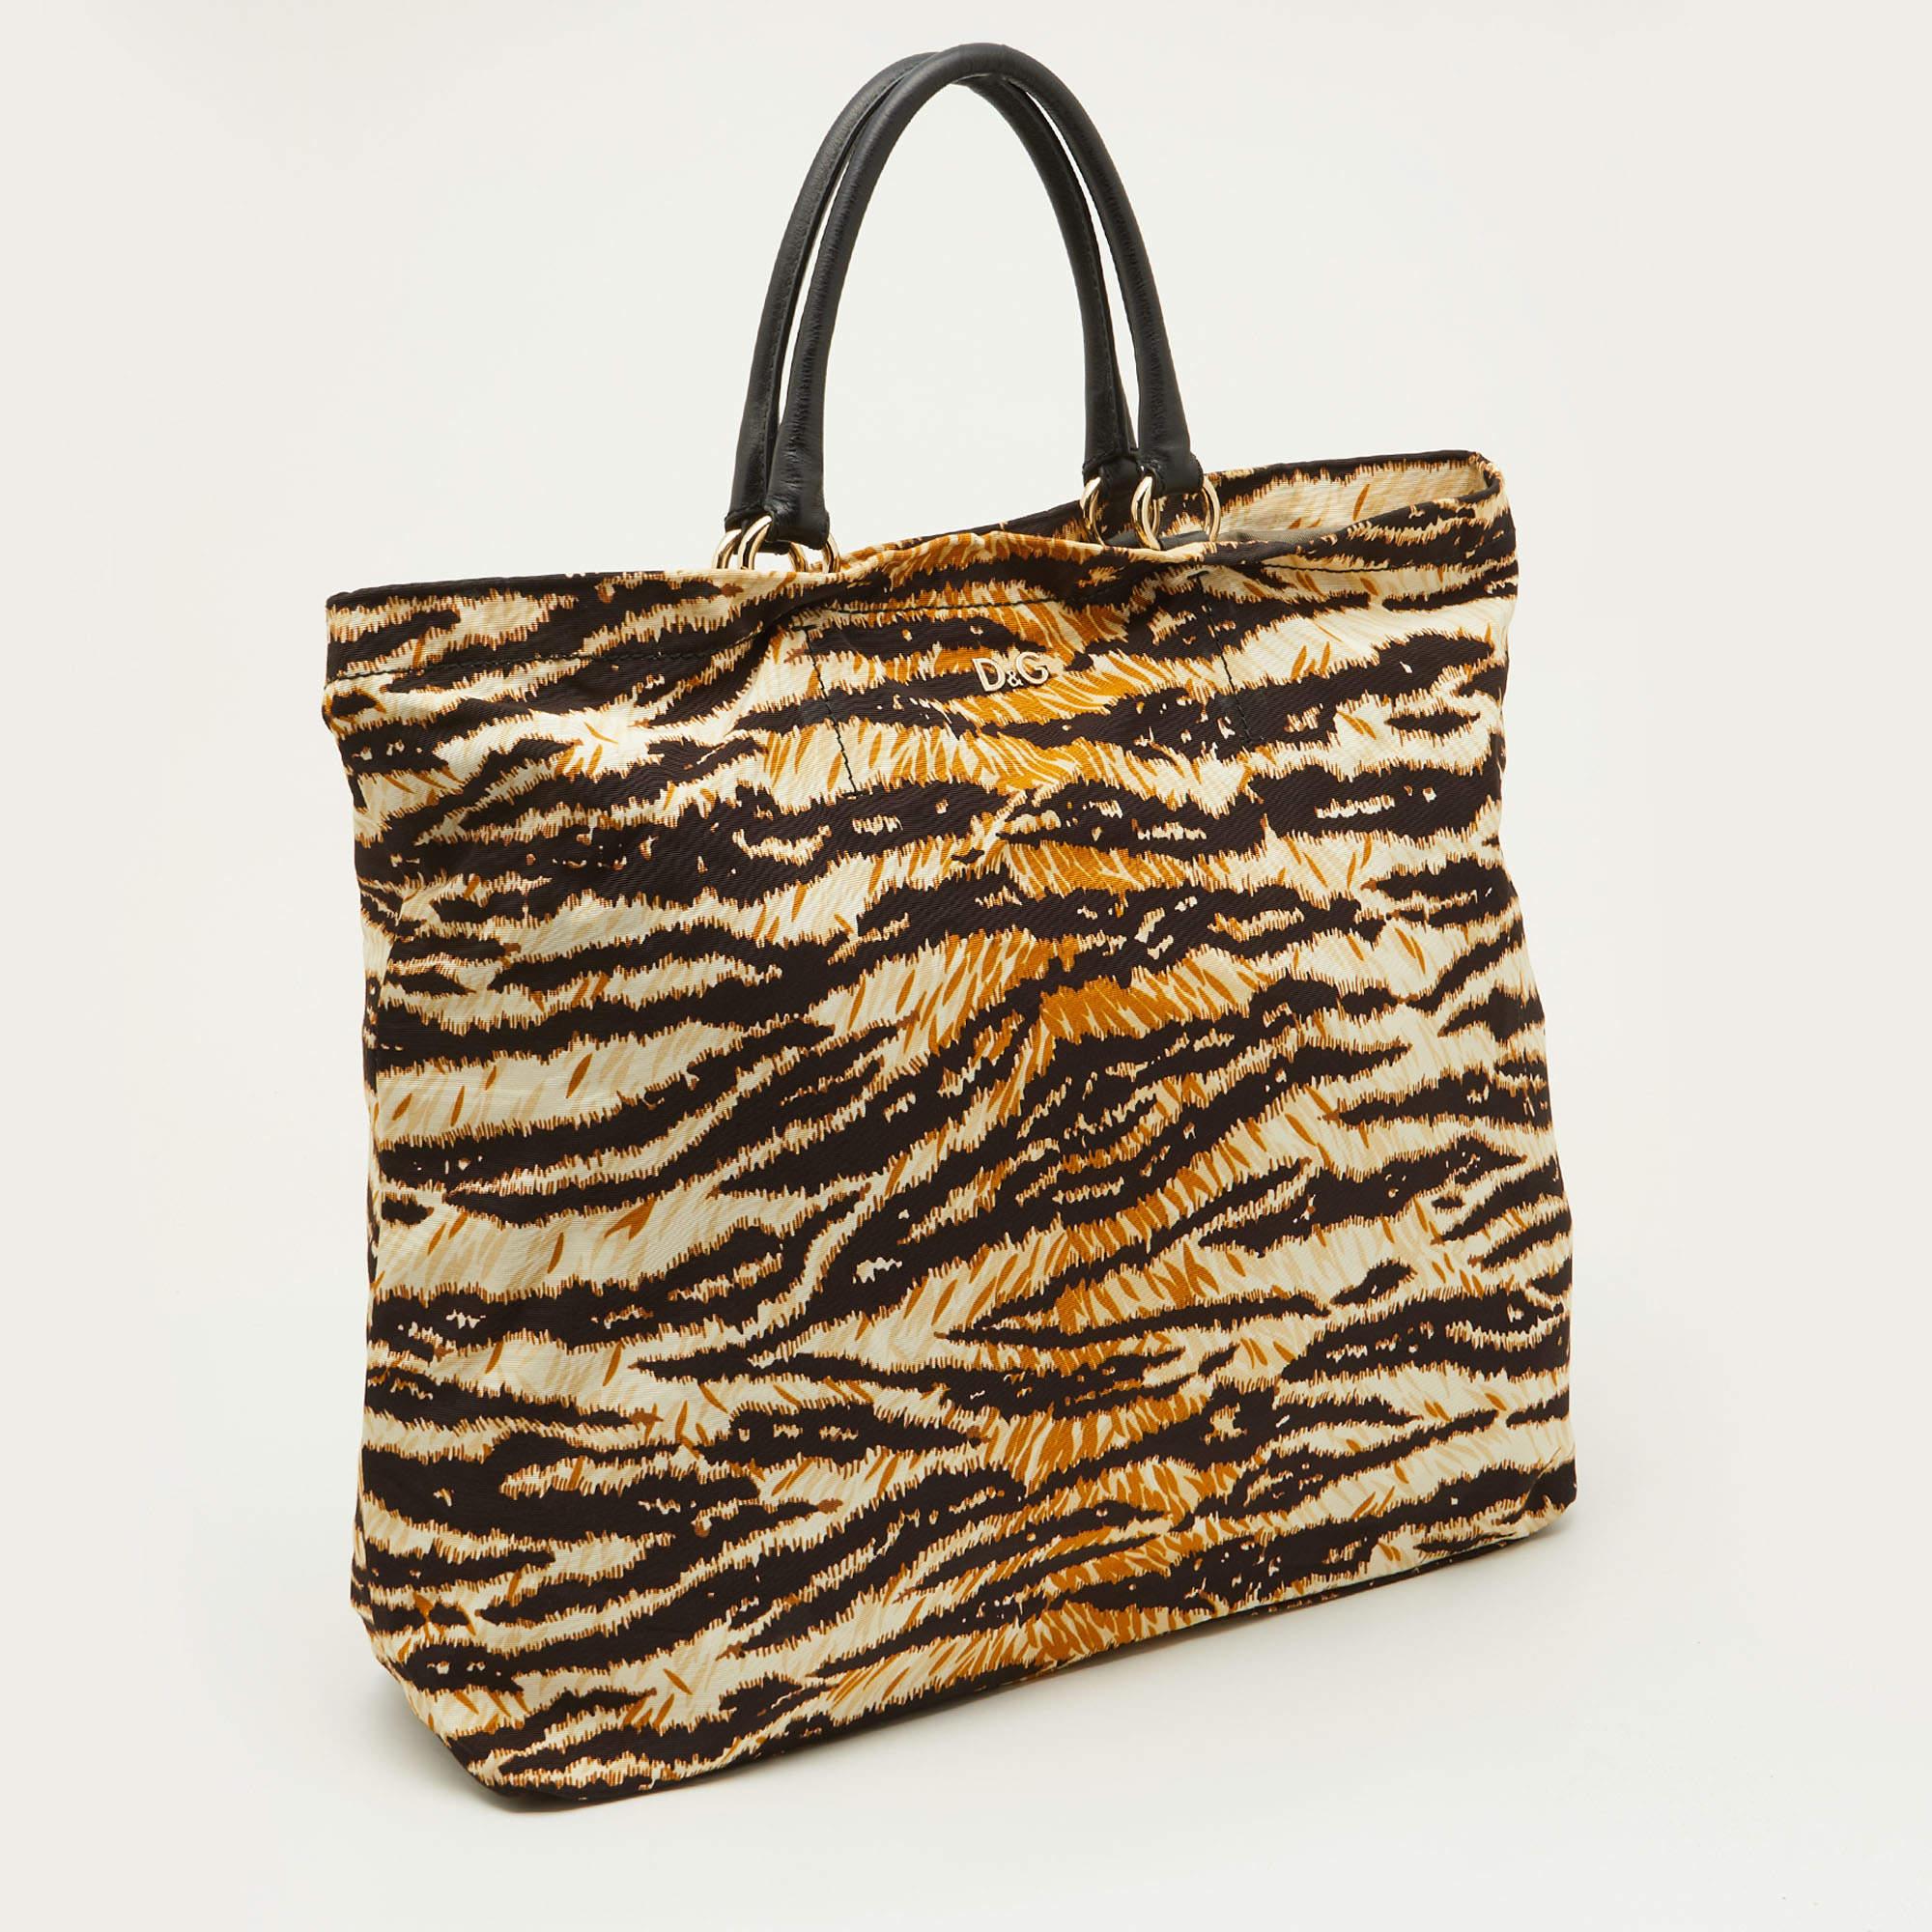 This D&G tote is a result of blending high crafting skills with a practical design. It arrives with a durable exterior completed by luxe detailing. It is an accessory that you can count on.

